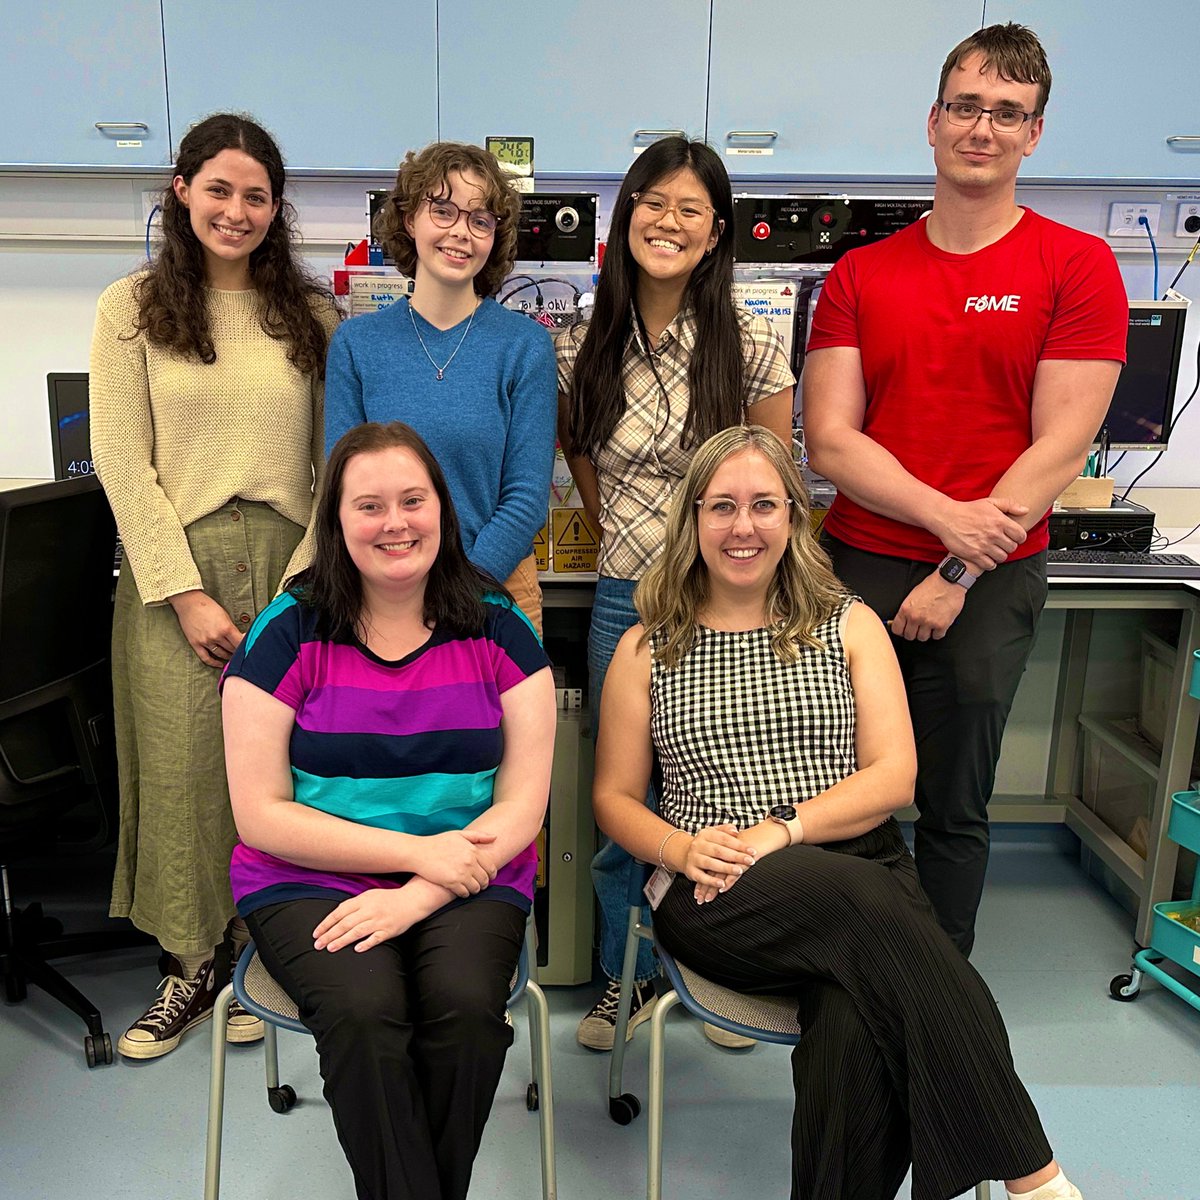 BTM is delighted to host four exceptional #VRES students ⭐️ Over the next three months Ashleigh, Ruth, Sophia and Dale will be working on a variety of #MEW projects, including investigating fatigue of novel tissue scaffolds. Welcome to the team! #research #students #engineering